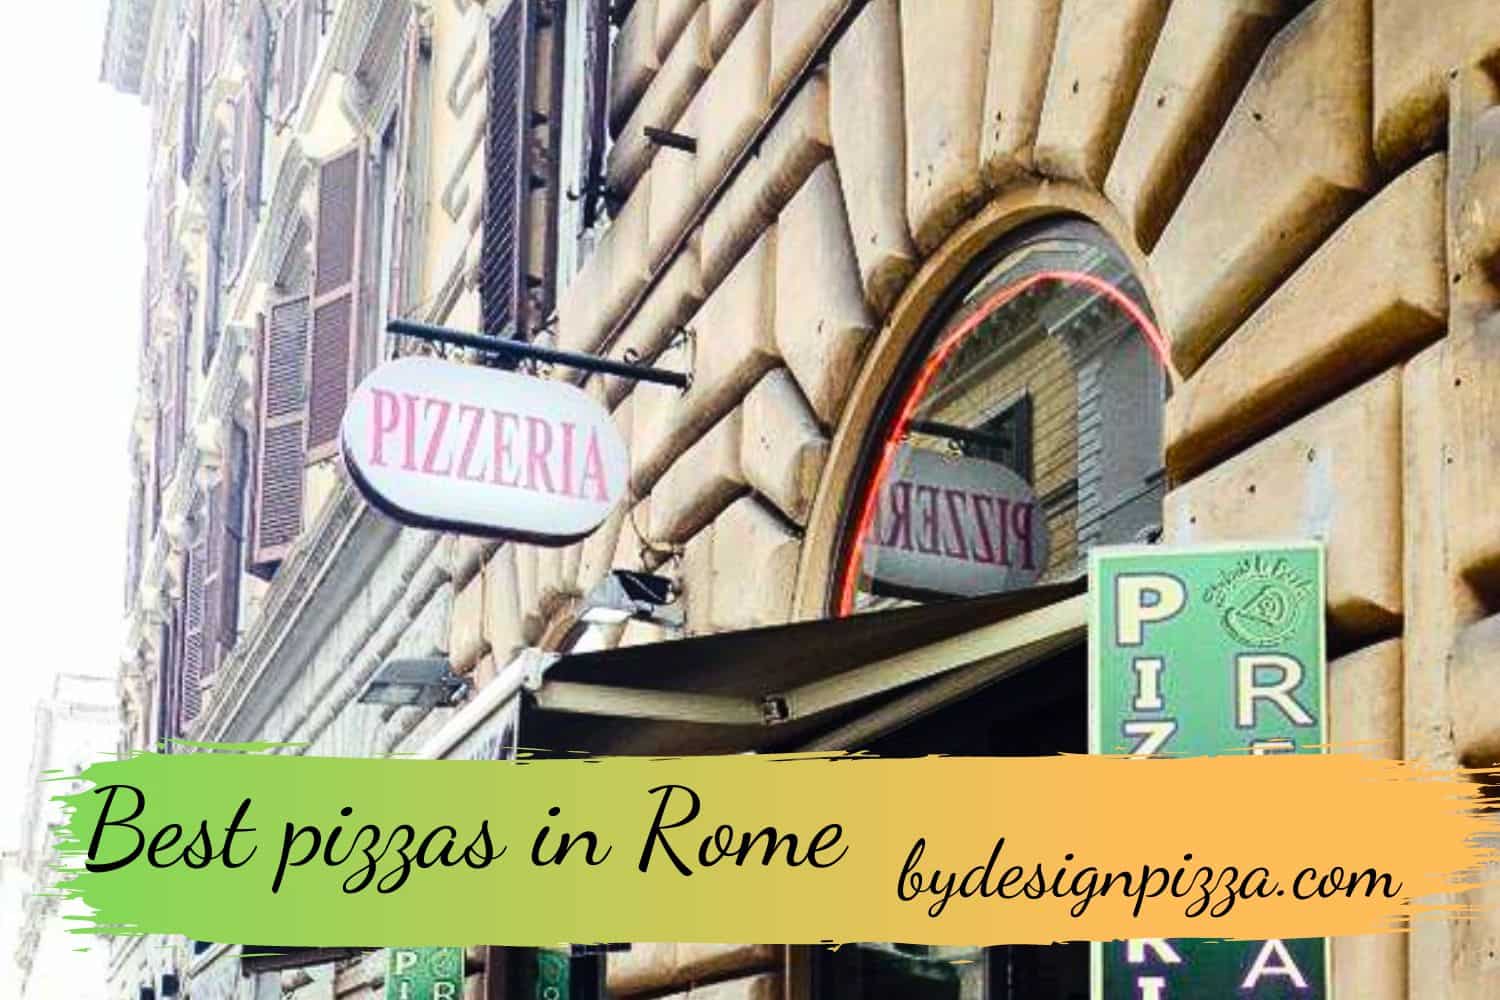 Best pizzas in Rome